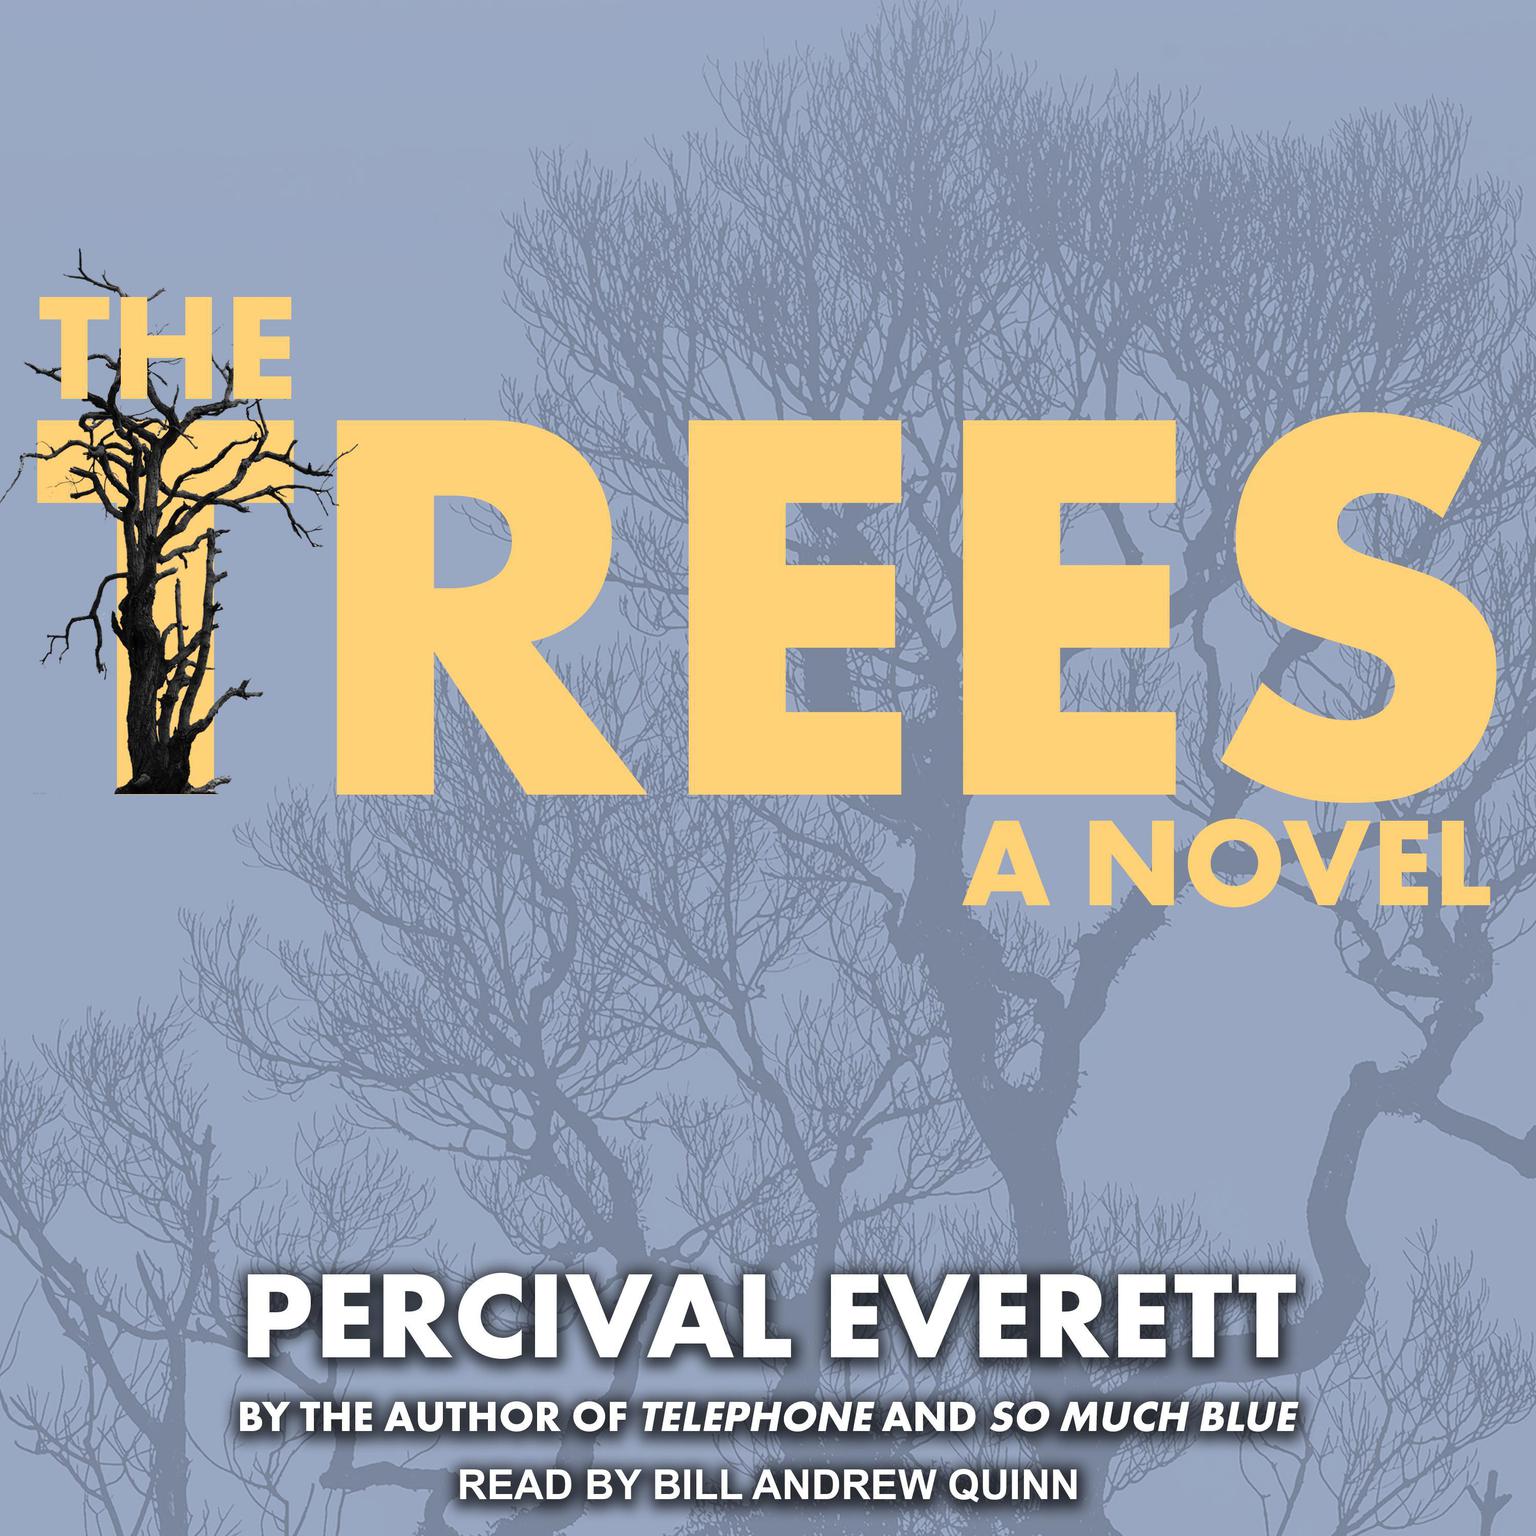 The Trees: A Novel Audiobook, by Percival Everett